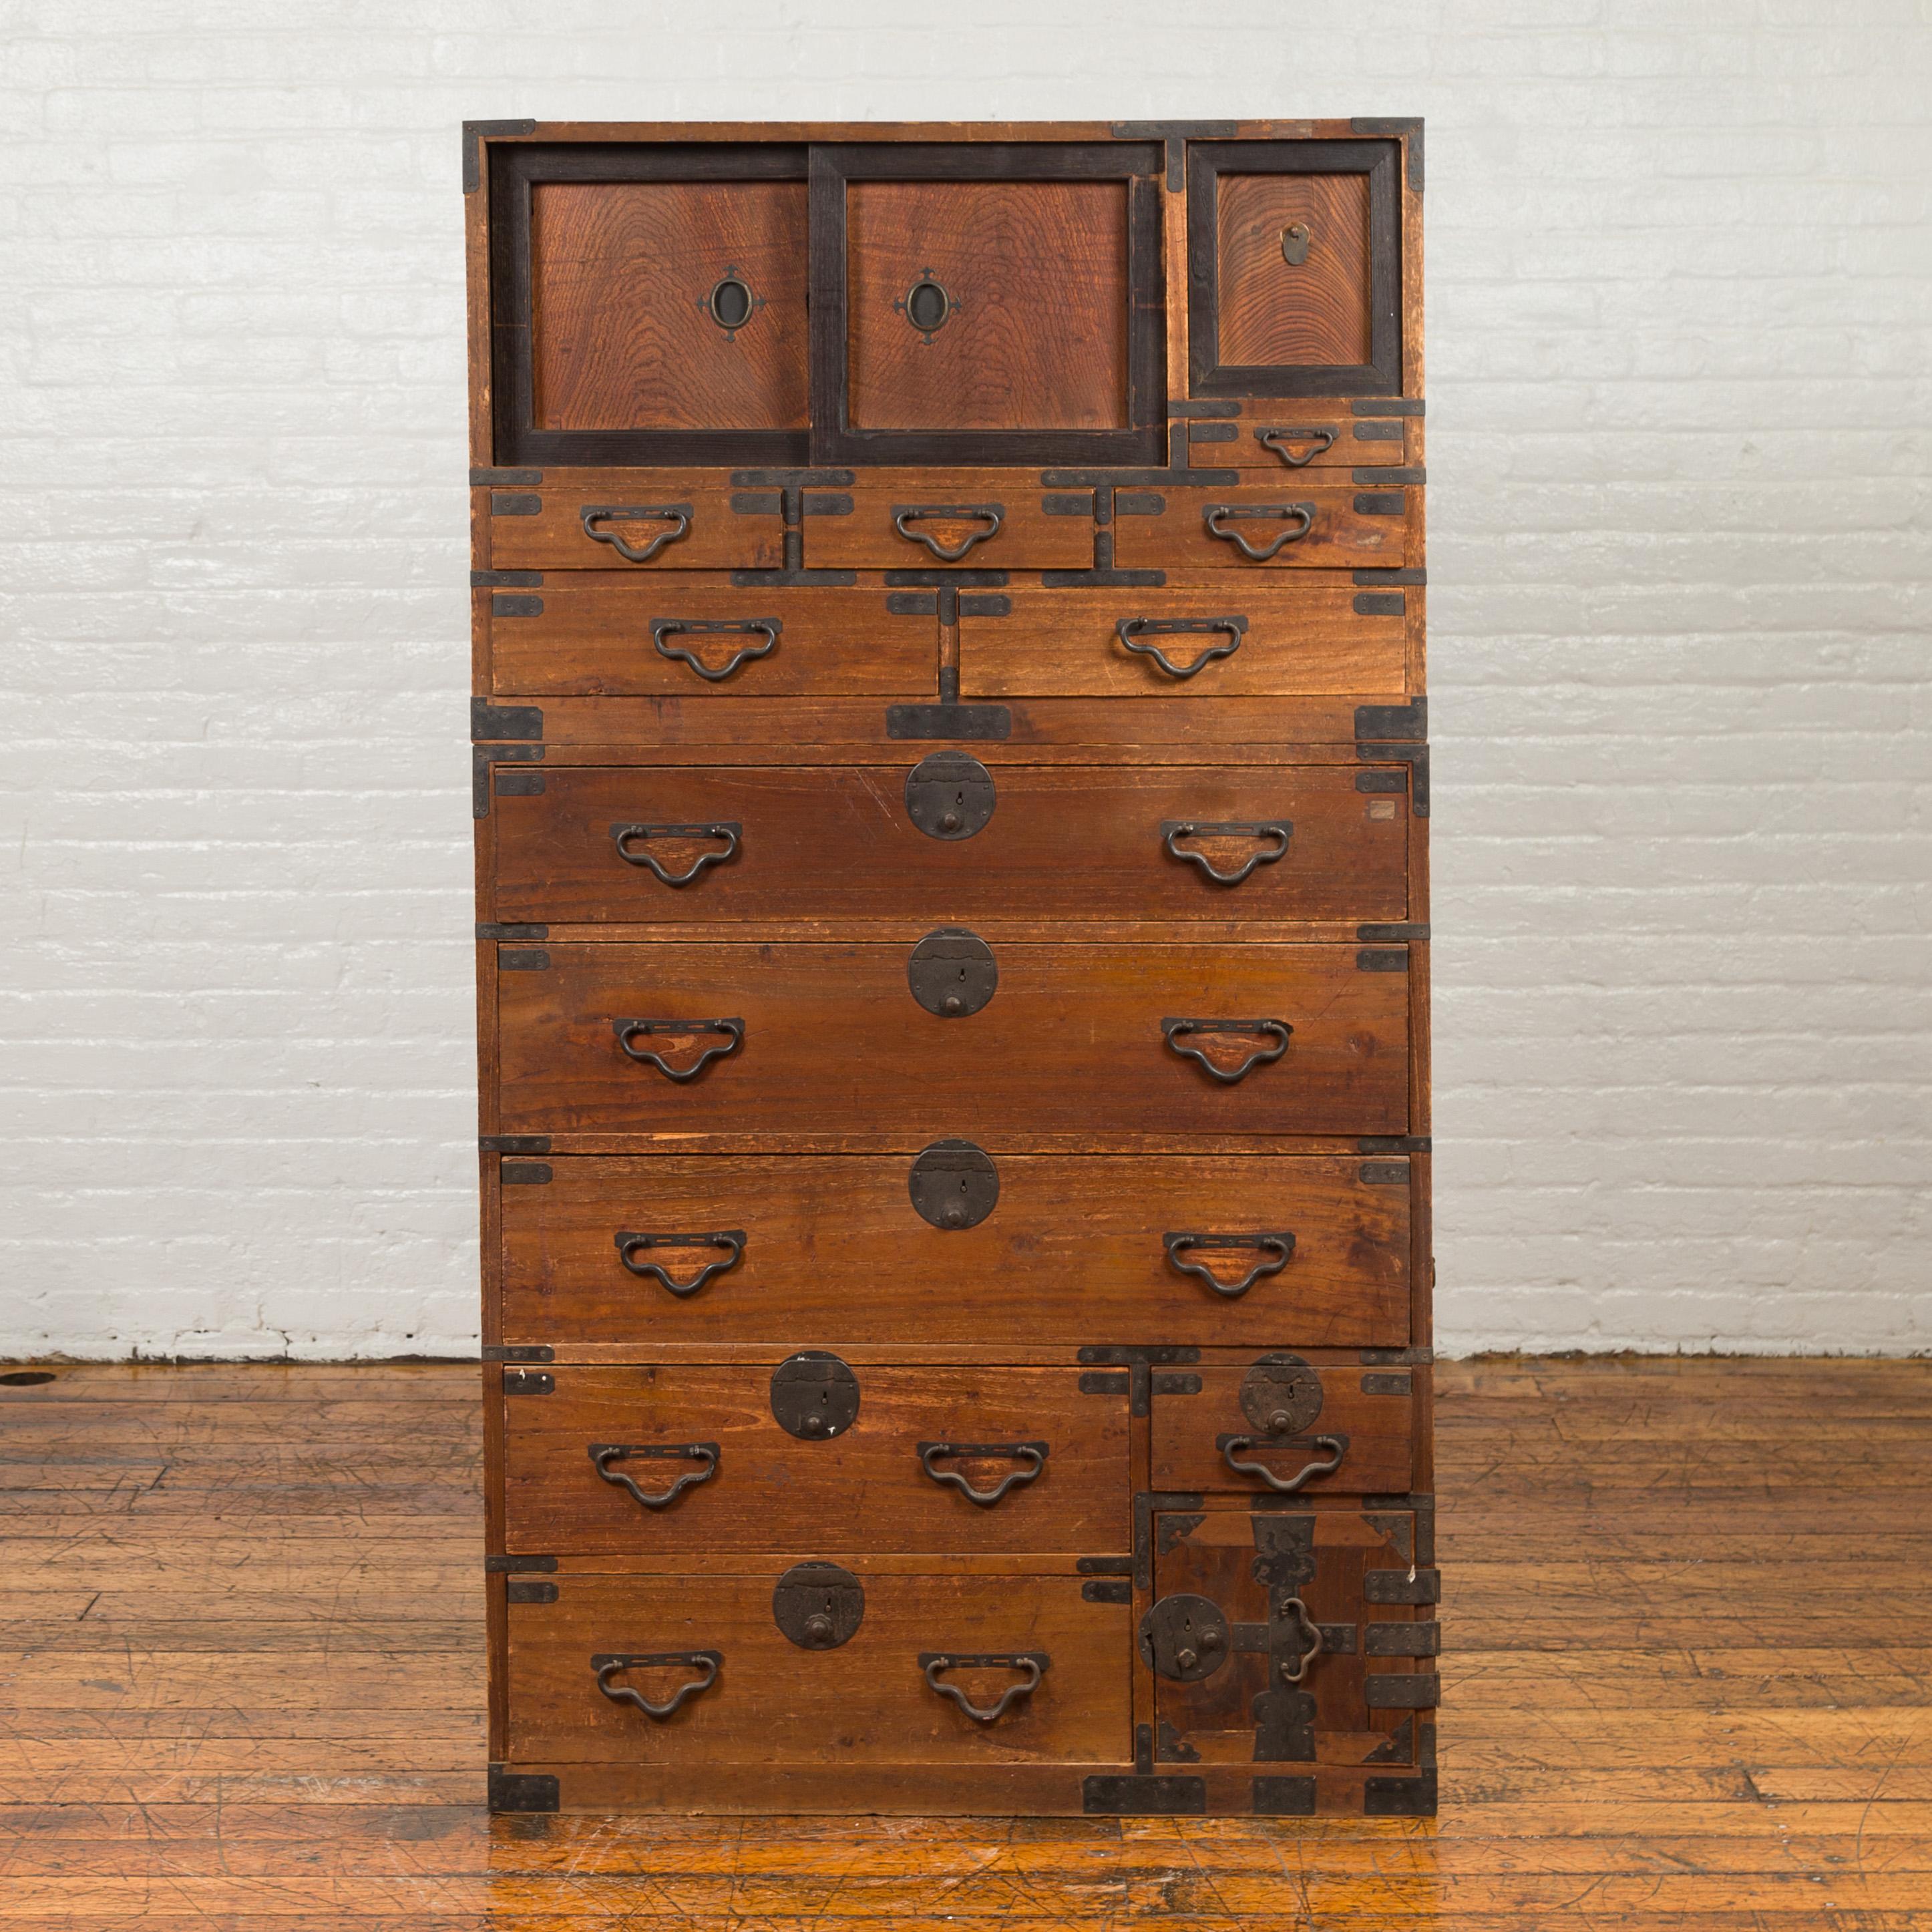 A Japanese Meiji period tall tansu chest from the late 19th century, with drawers and sliding panels. Born in Japan during the later years of the 19th century, this two-section tall tansu chest features two sliding panels and a removable one in its